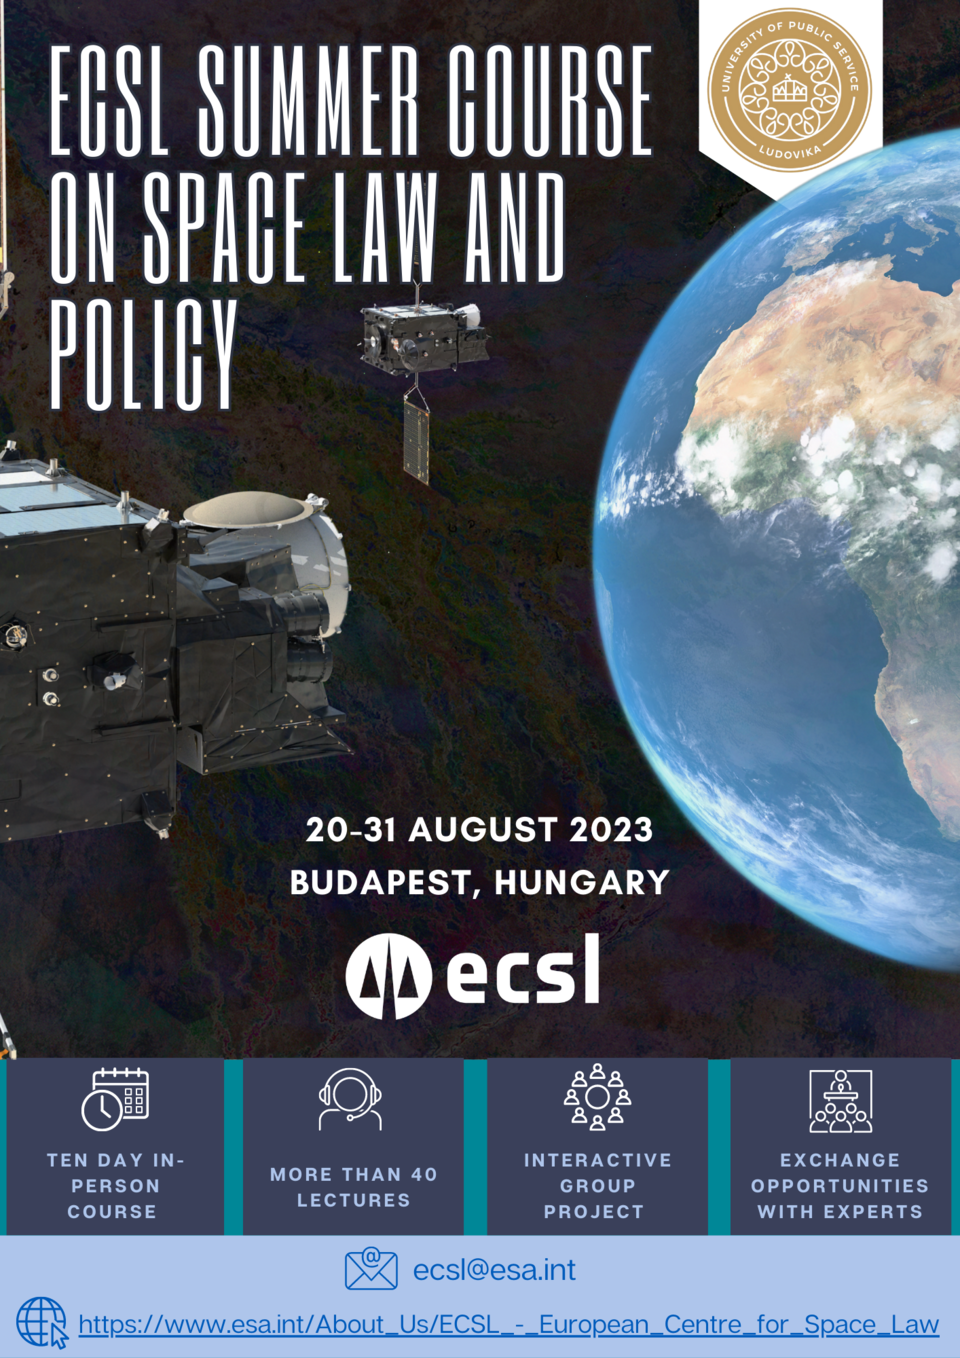 ESA/ECSL Summer Course on Space Law and Policy 2023